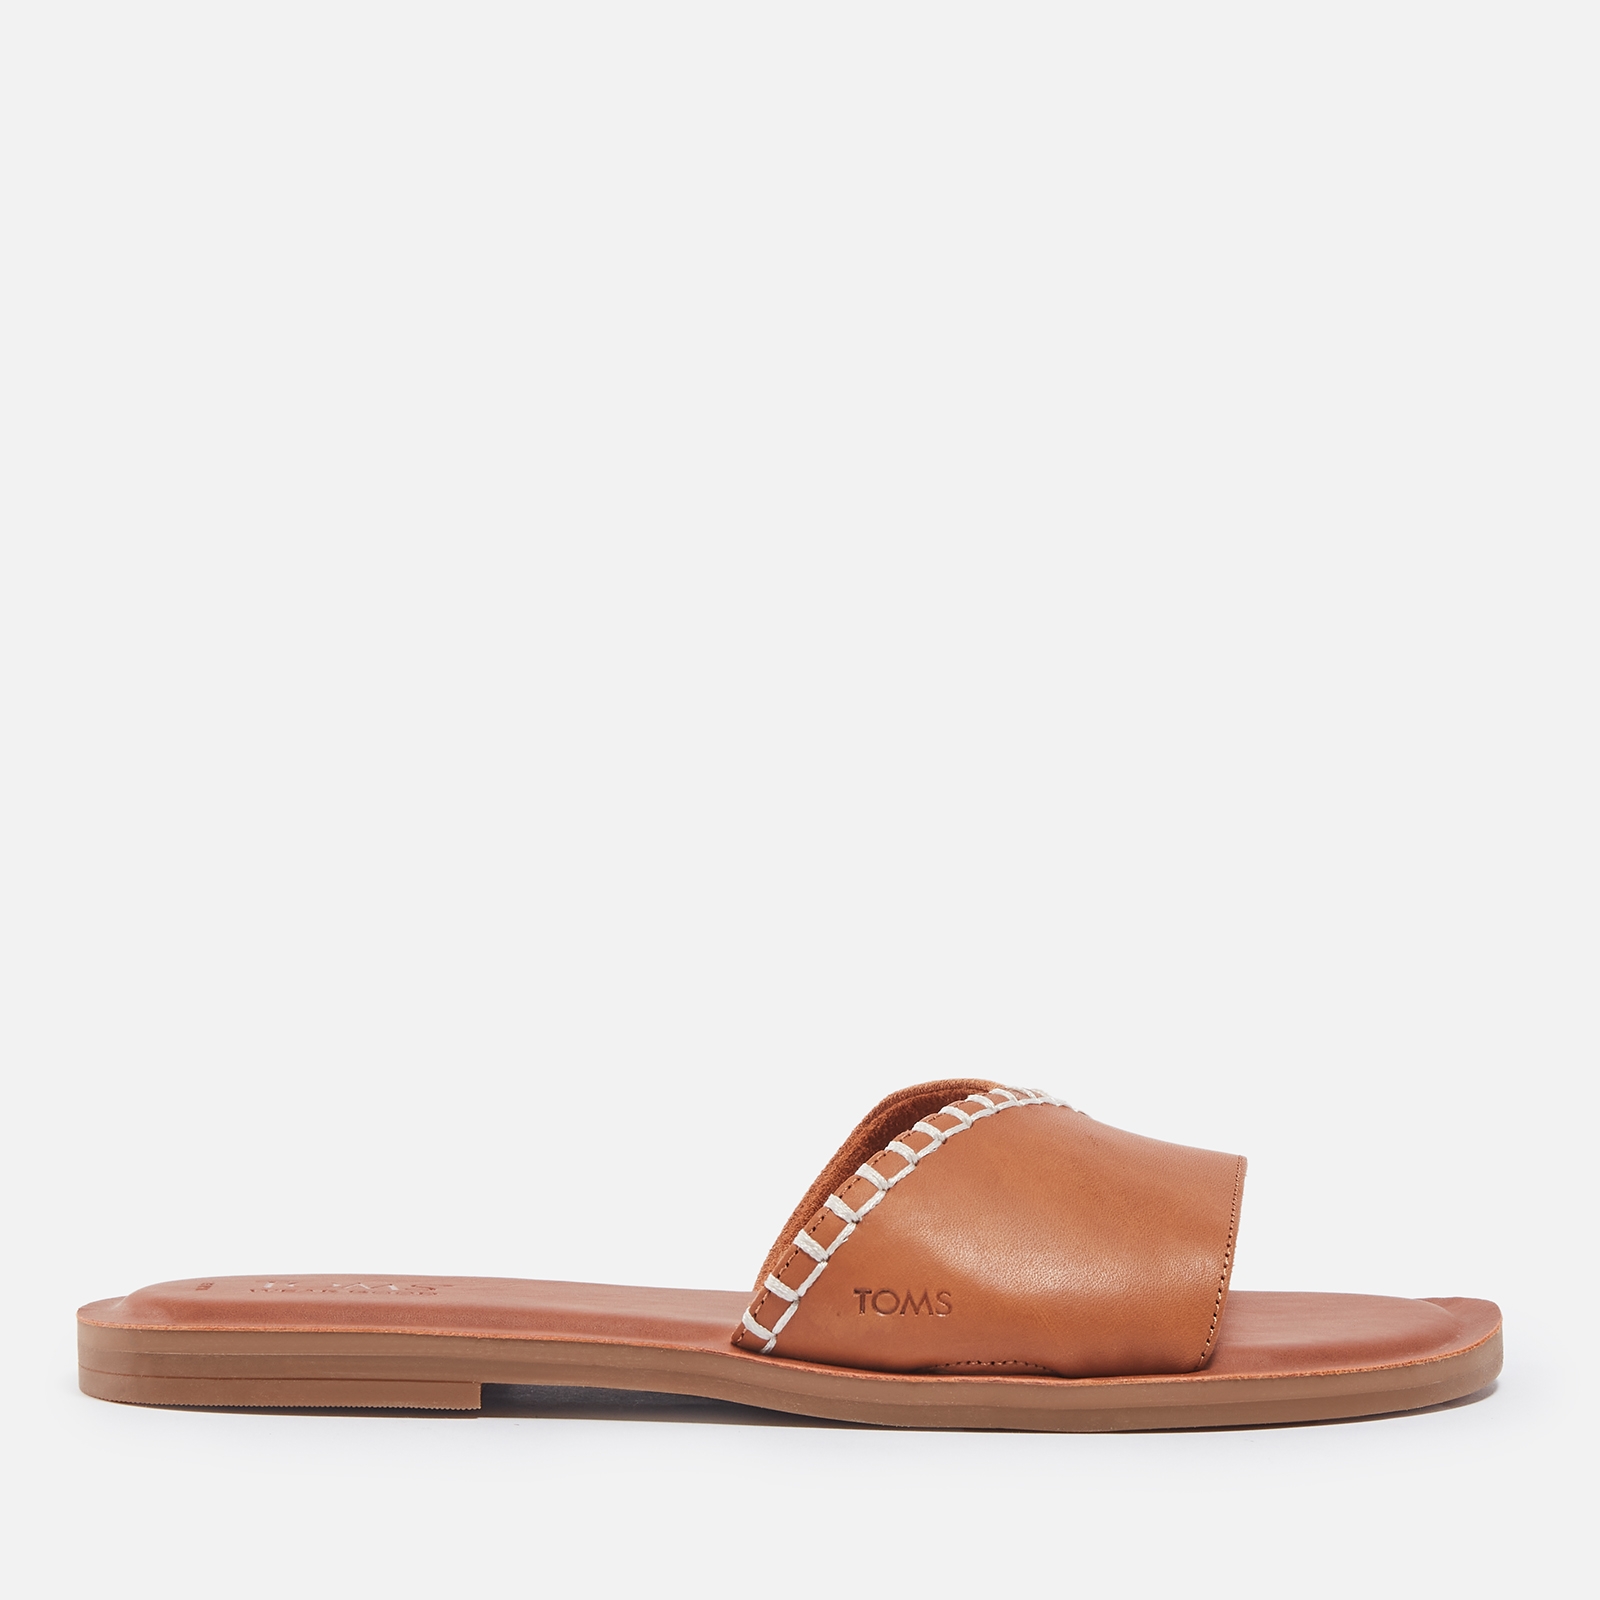 TOMS Women's Shea Leather and Suede Sandals - UK 7